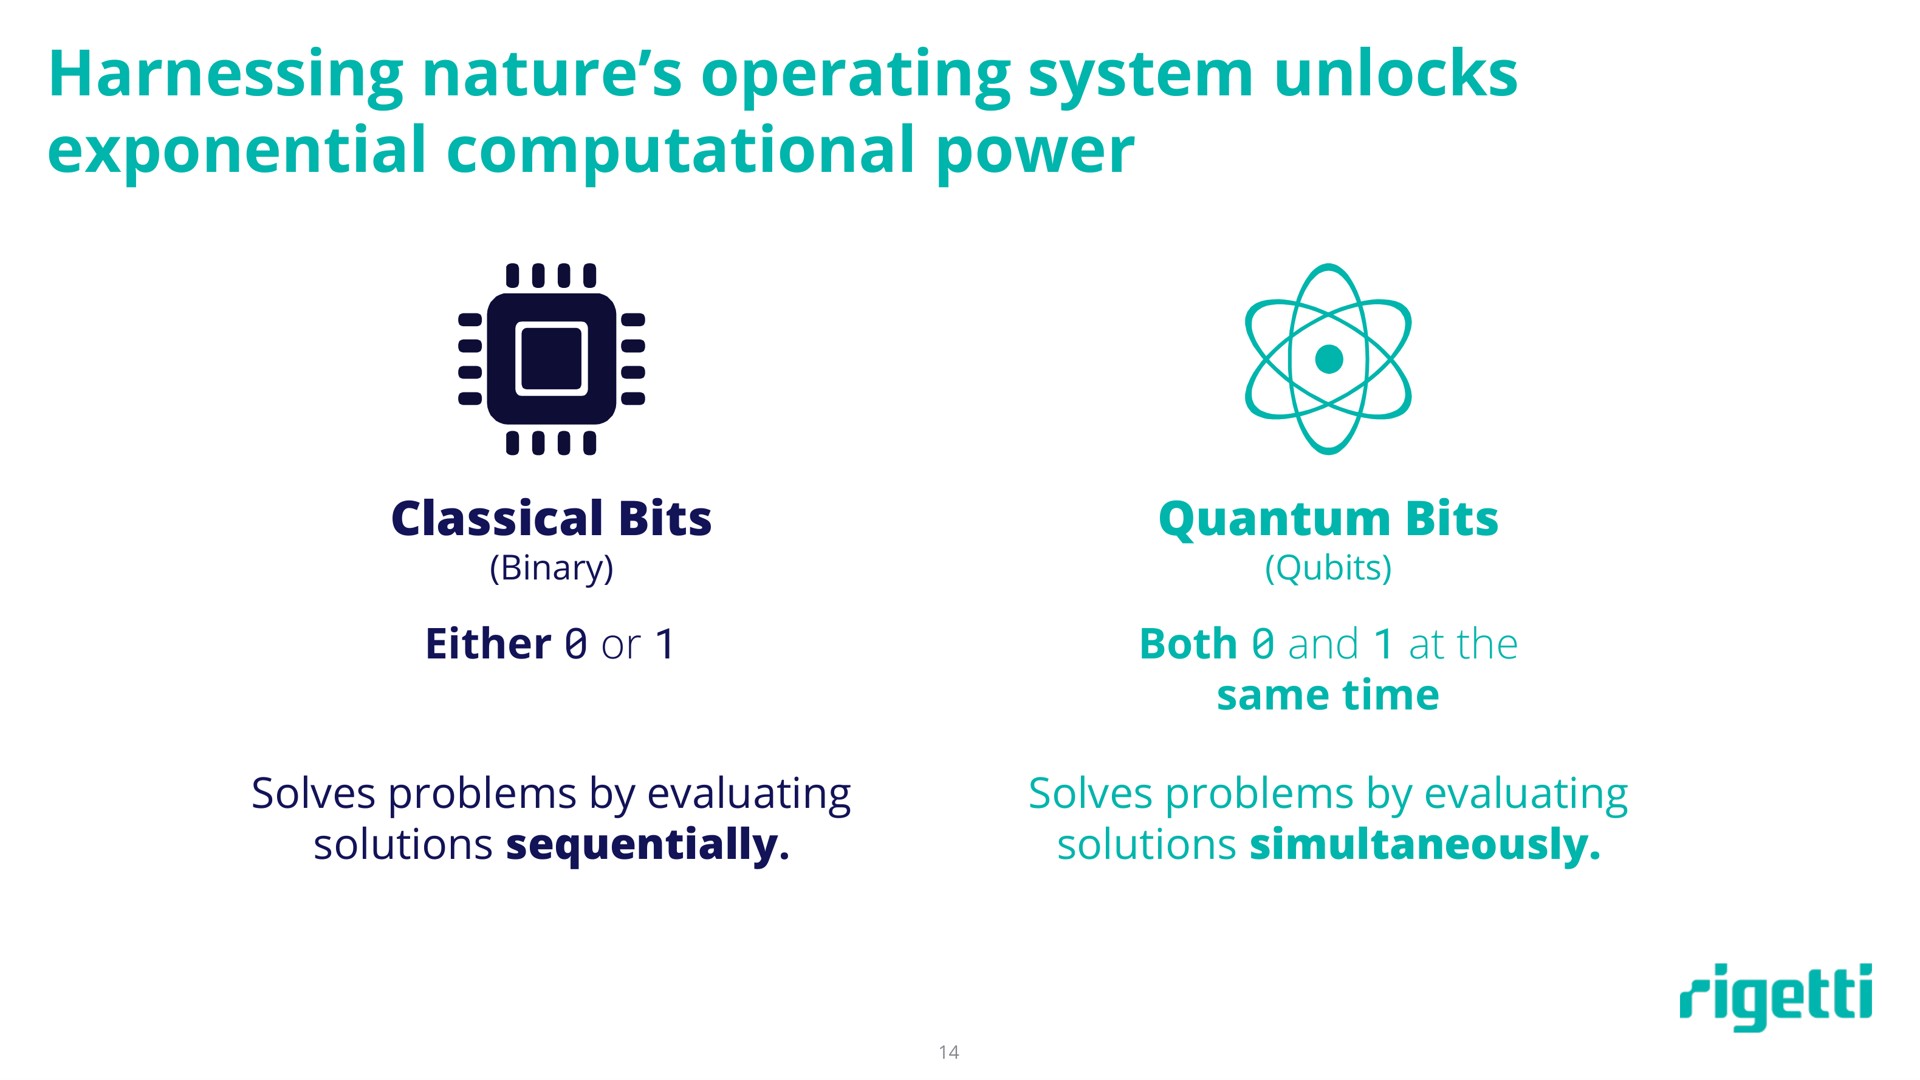 harnessing nature operating system unlocks exponential computational power | Rigetti